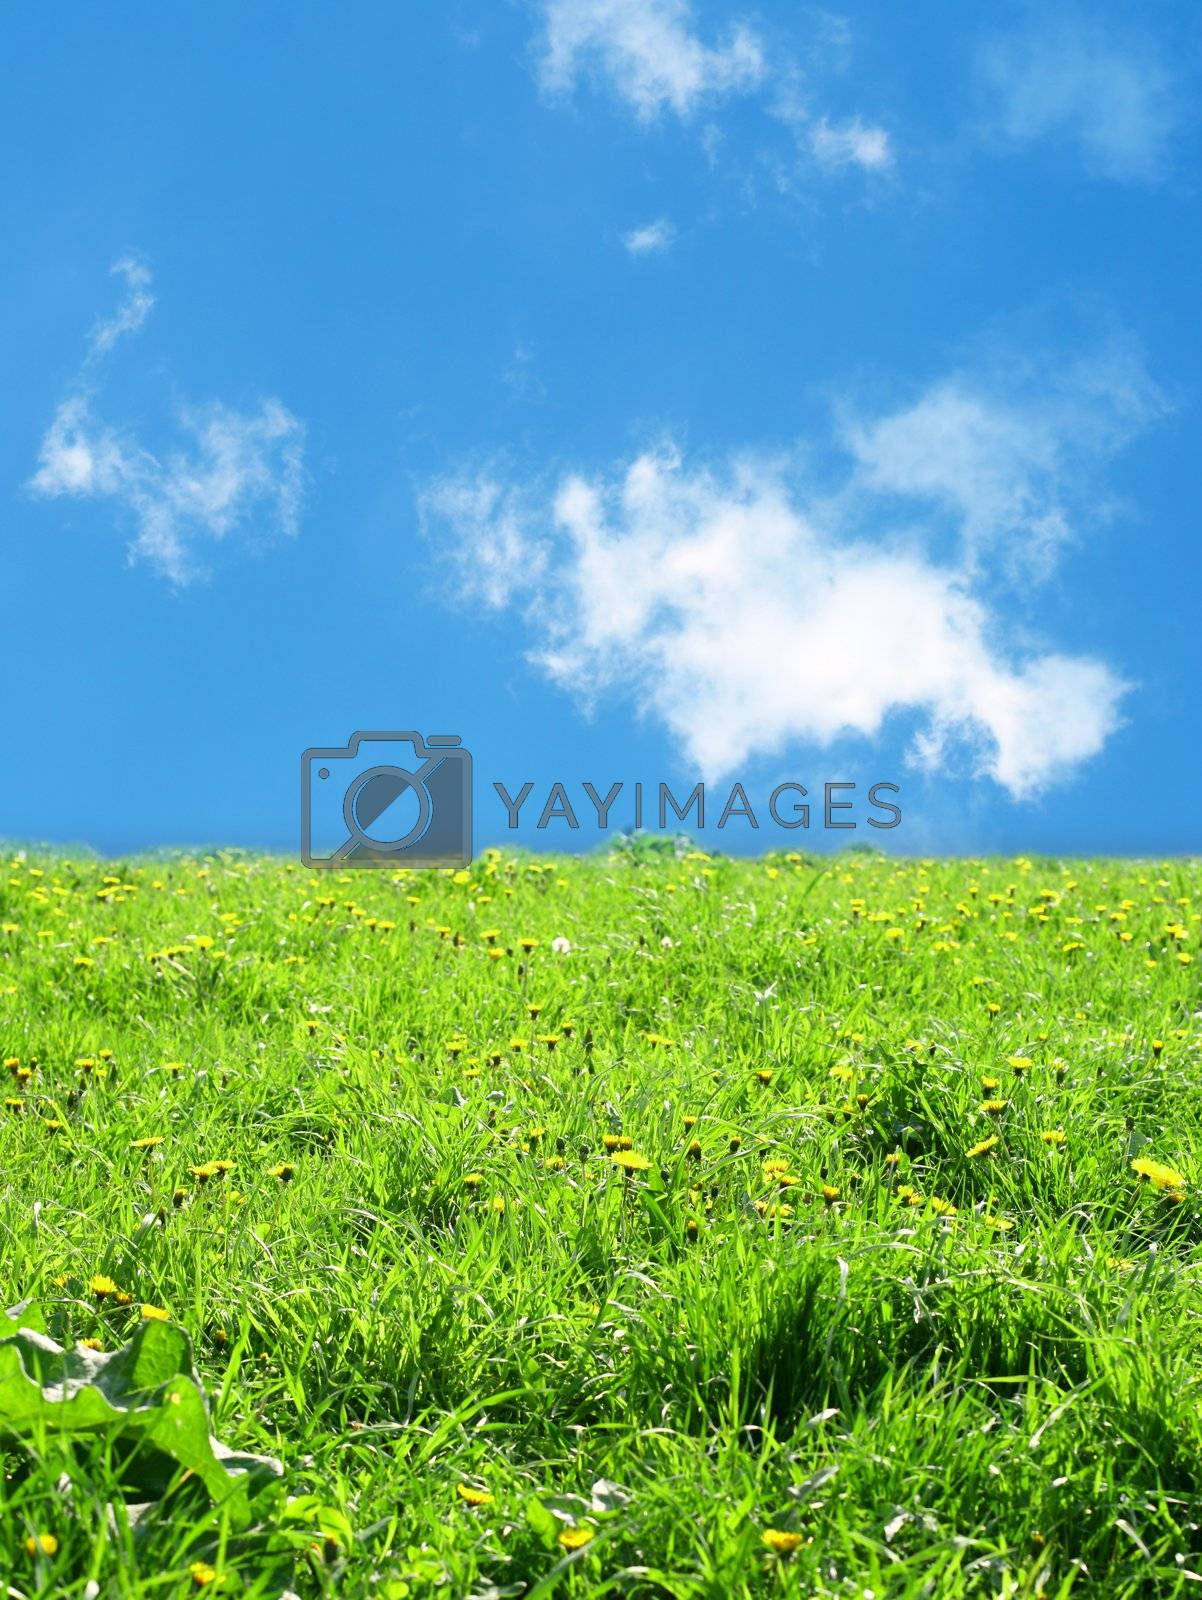 Royalty free image of green grass landscape by Yellowj